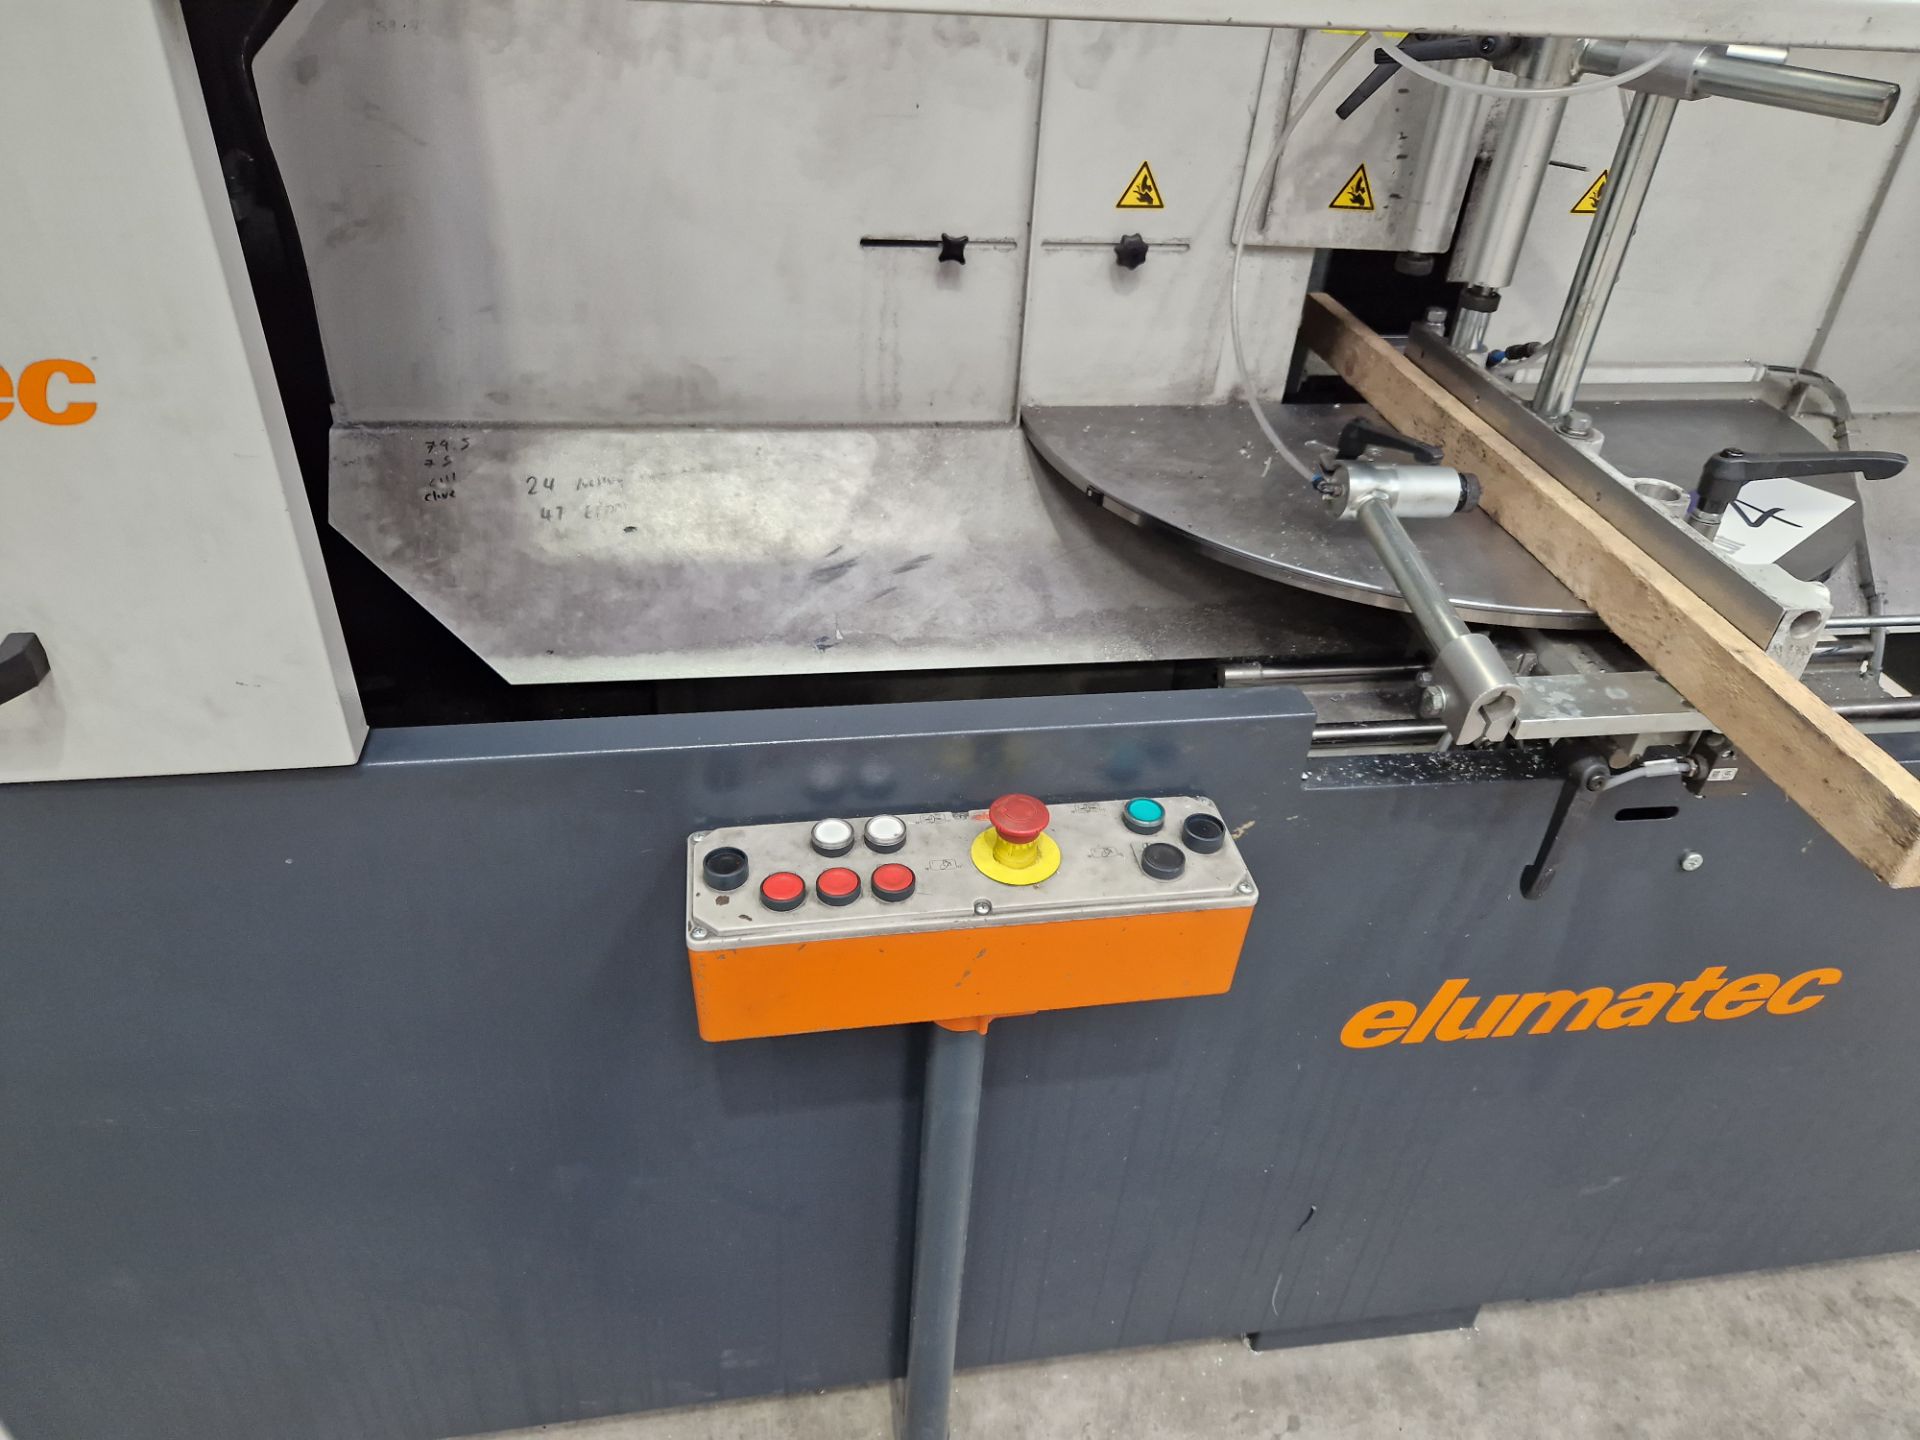 elumatec AKS 134/64 Notching Saw, Serial No. 1346421033, Year of Manufacture 2019 (Subject to - Image 5 of 5